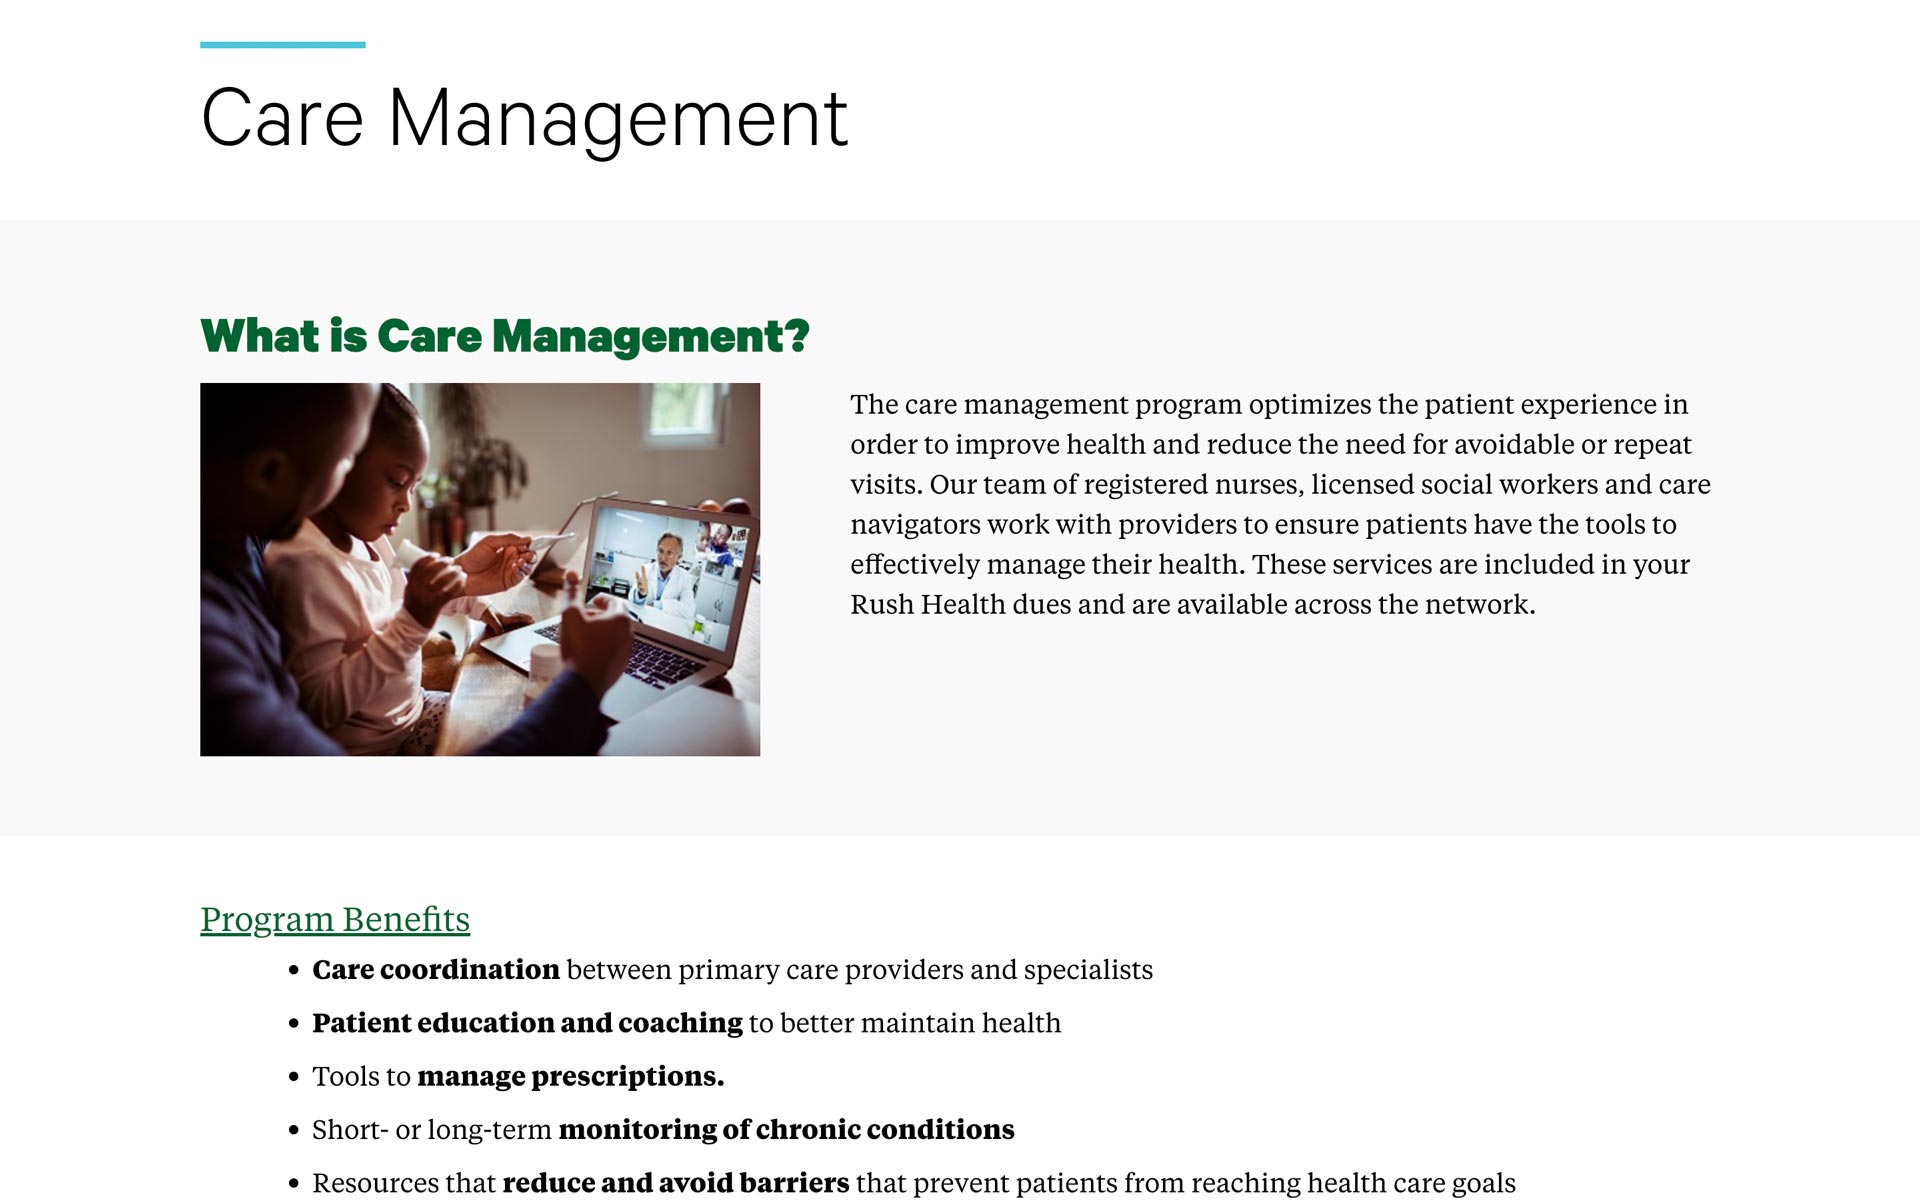 rush webpage showing care management